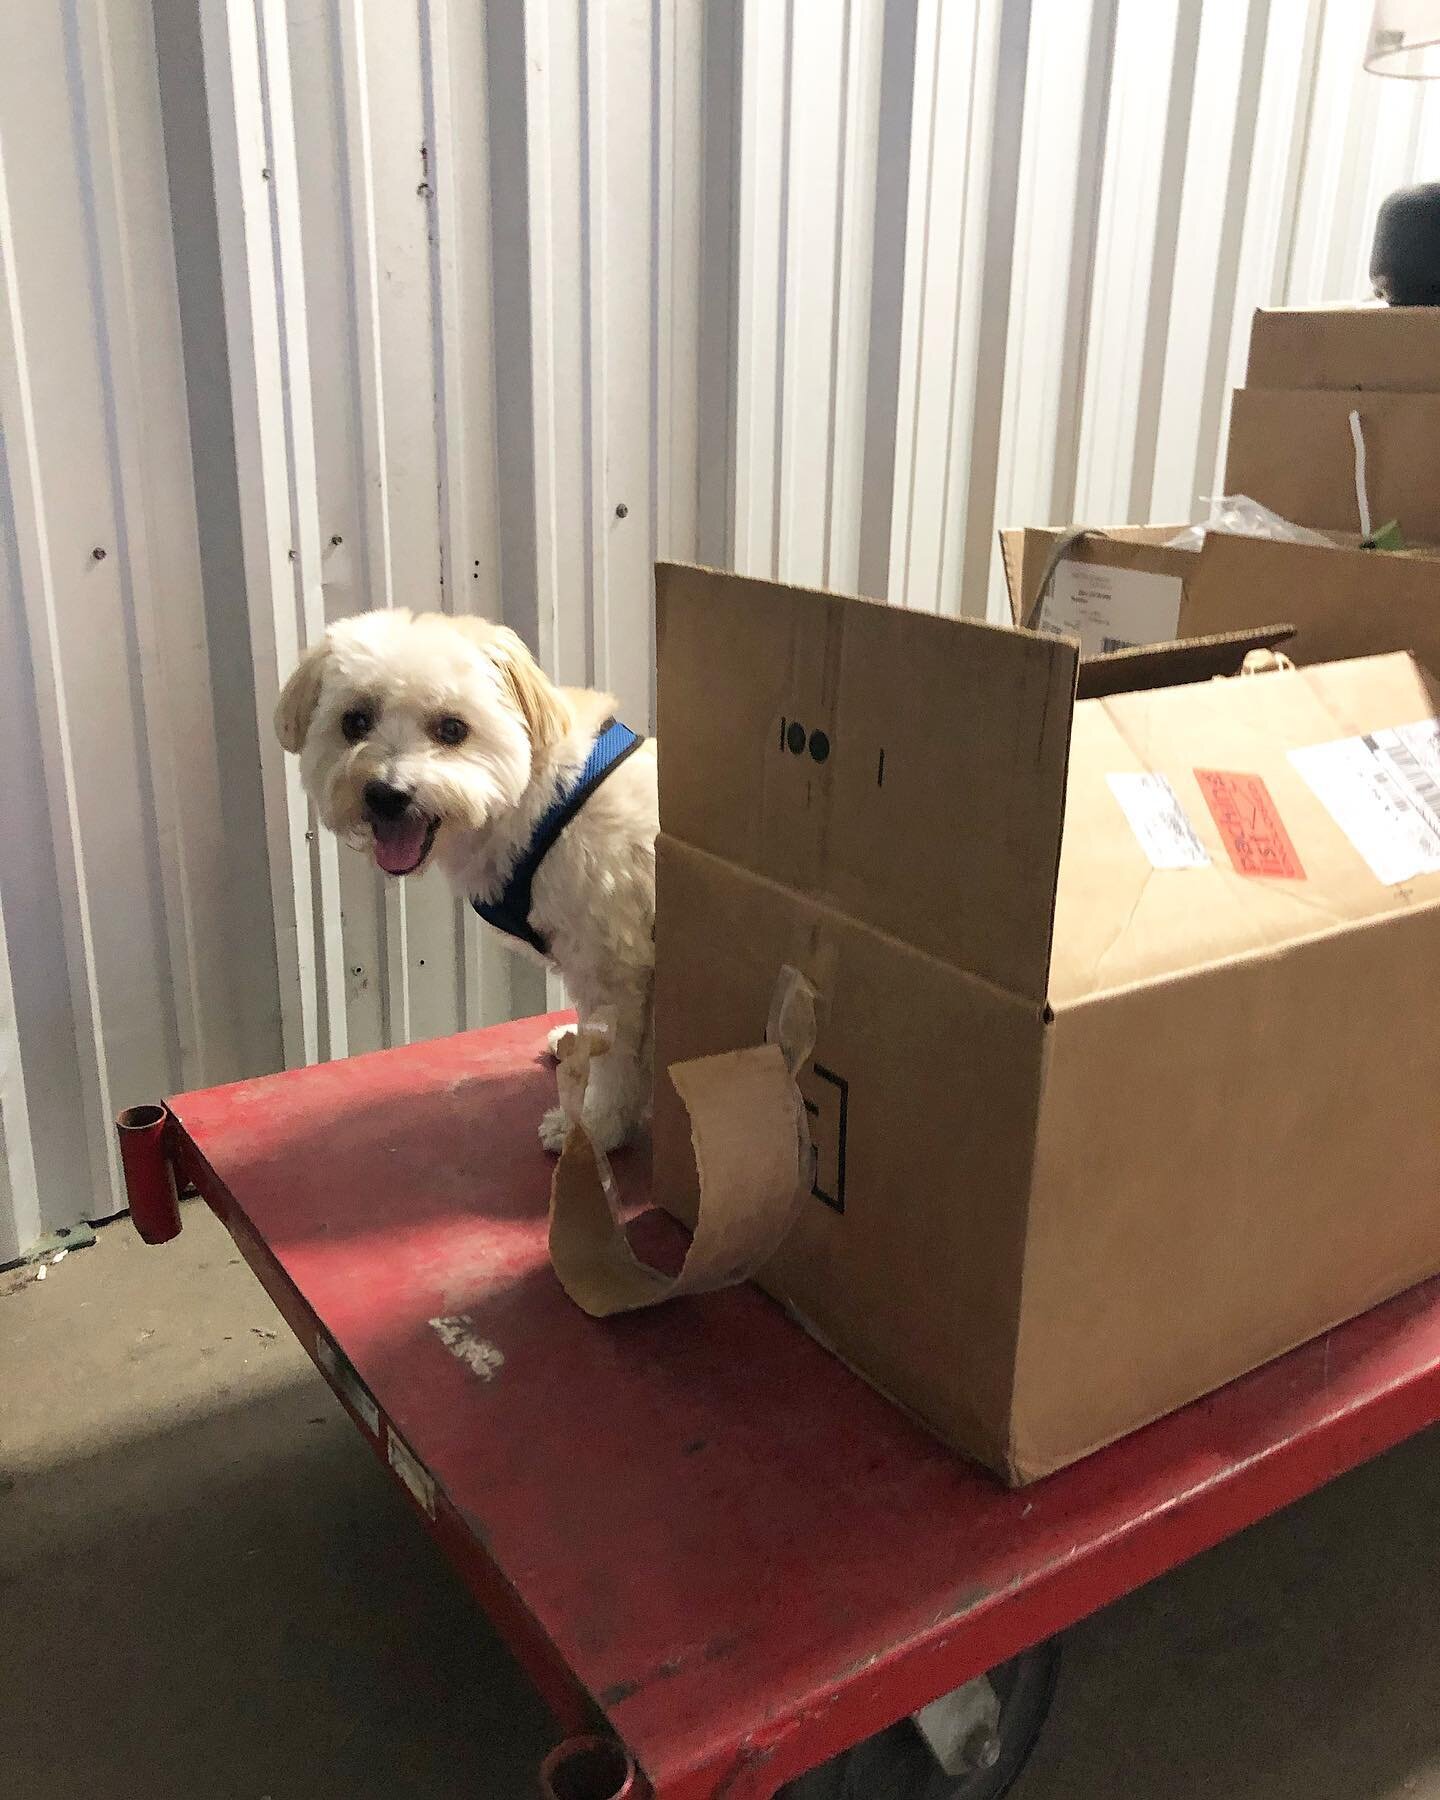 Just getting carted around again. Mascot duties for @visitbatch 
.
.
#packages #ridealong #workinghard #workinglikeadog #specialdelivery #coton #cotondog #cotonlove #cotonsofinstagram #cotondetulear #dogsofsf #dogstagram #dogsofinsta #instadog #daily